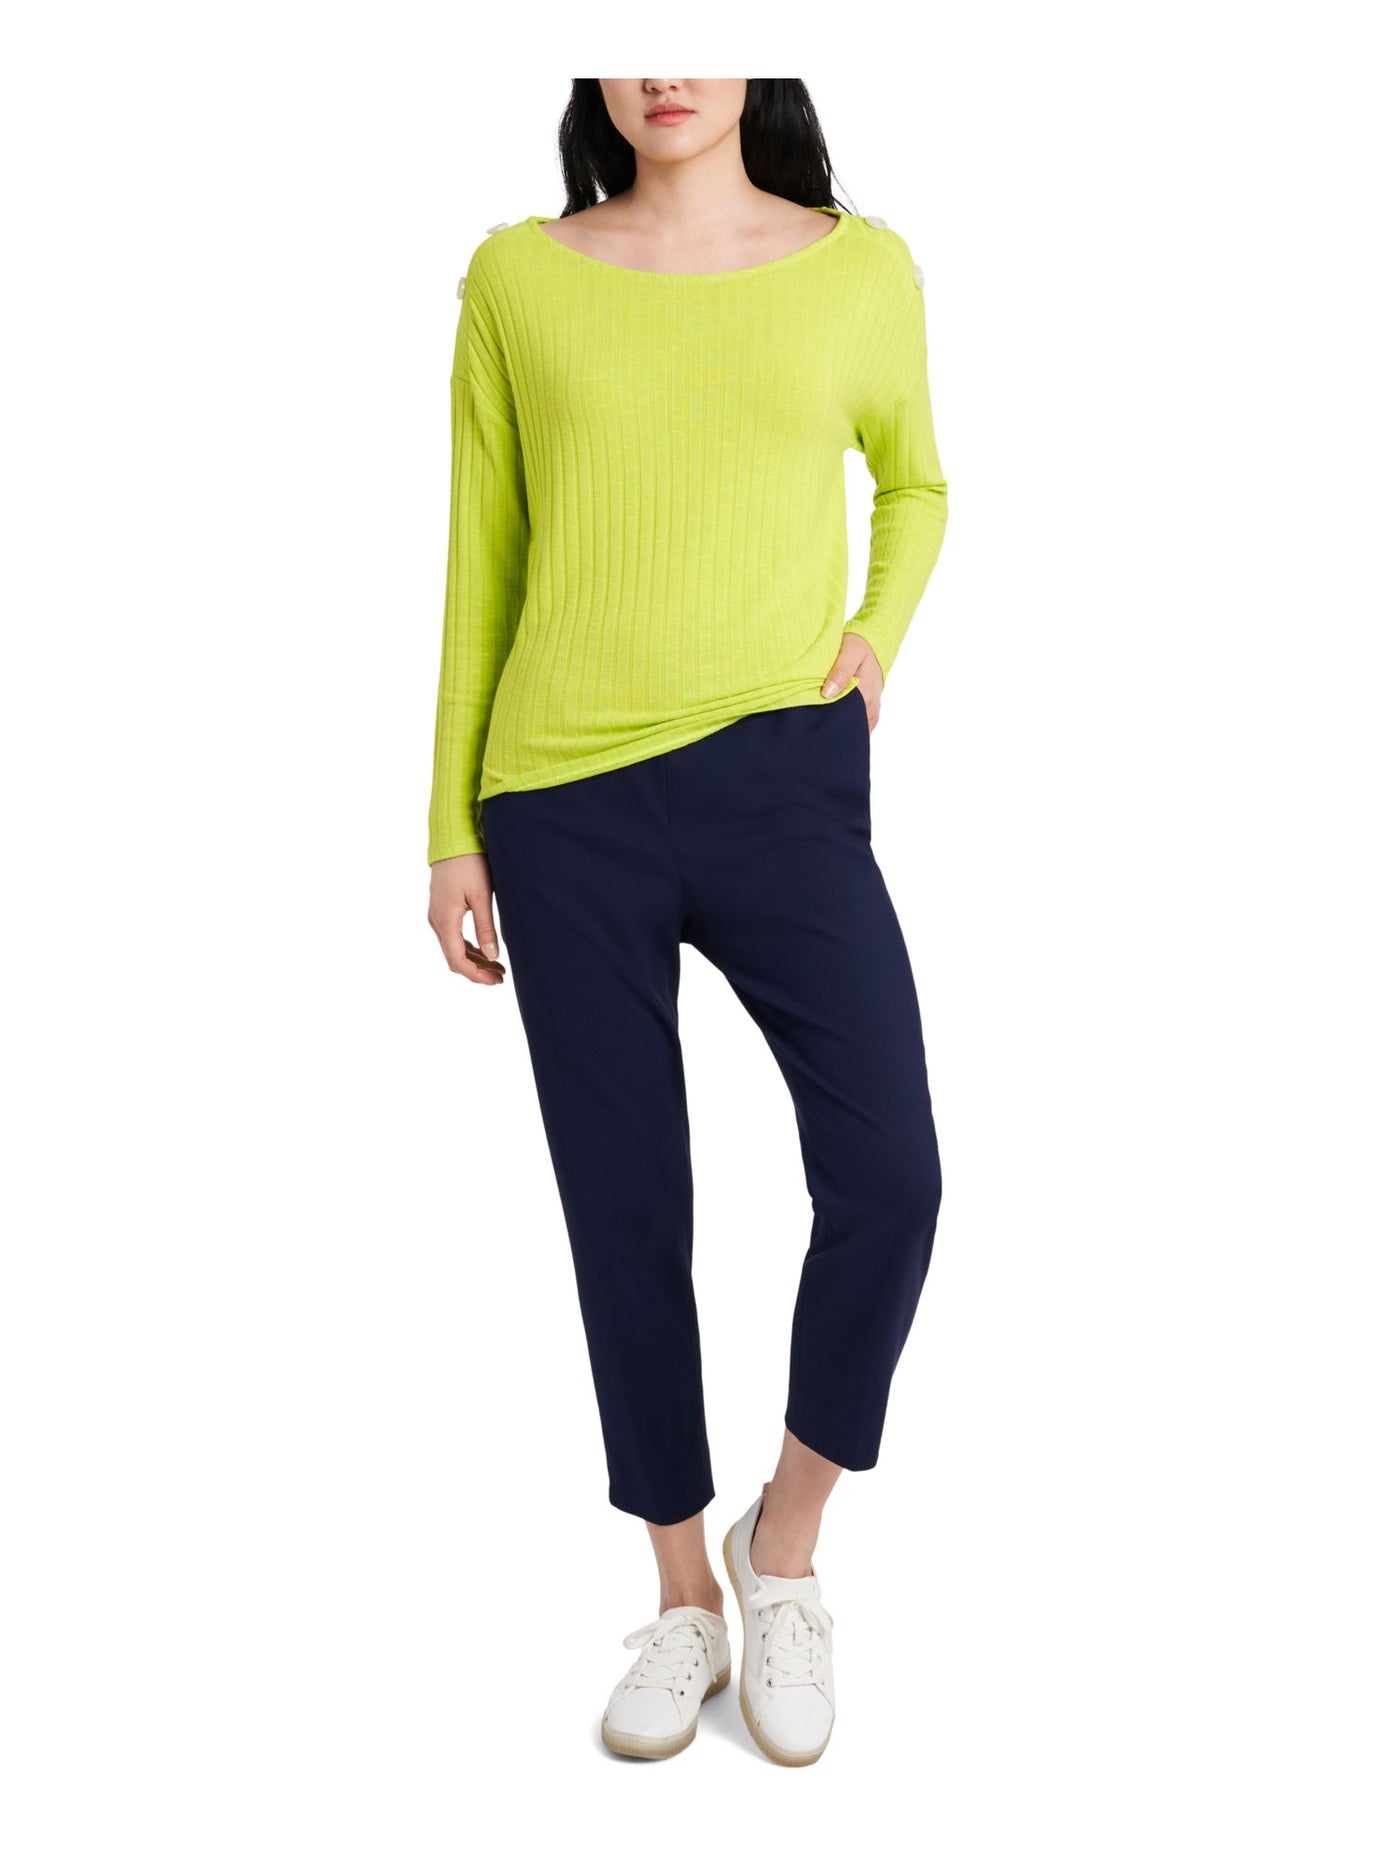 RILEY&RAE Womens Green Neon Lime Button-detail Long Sleeve Scoop Neck Top XS